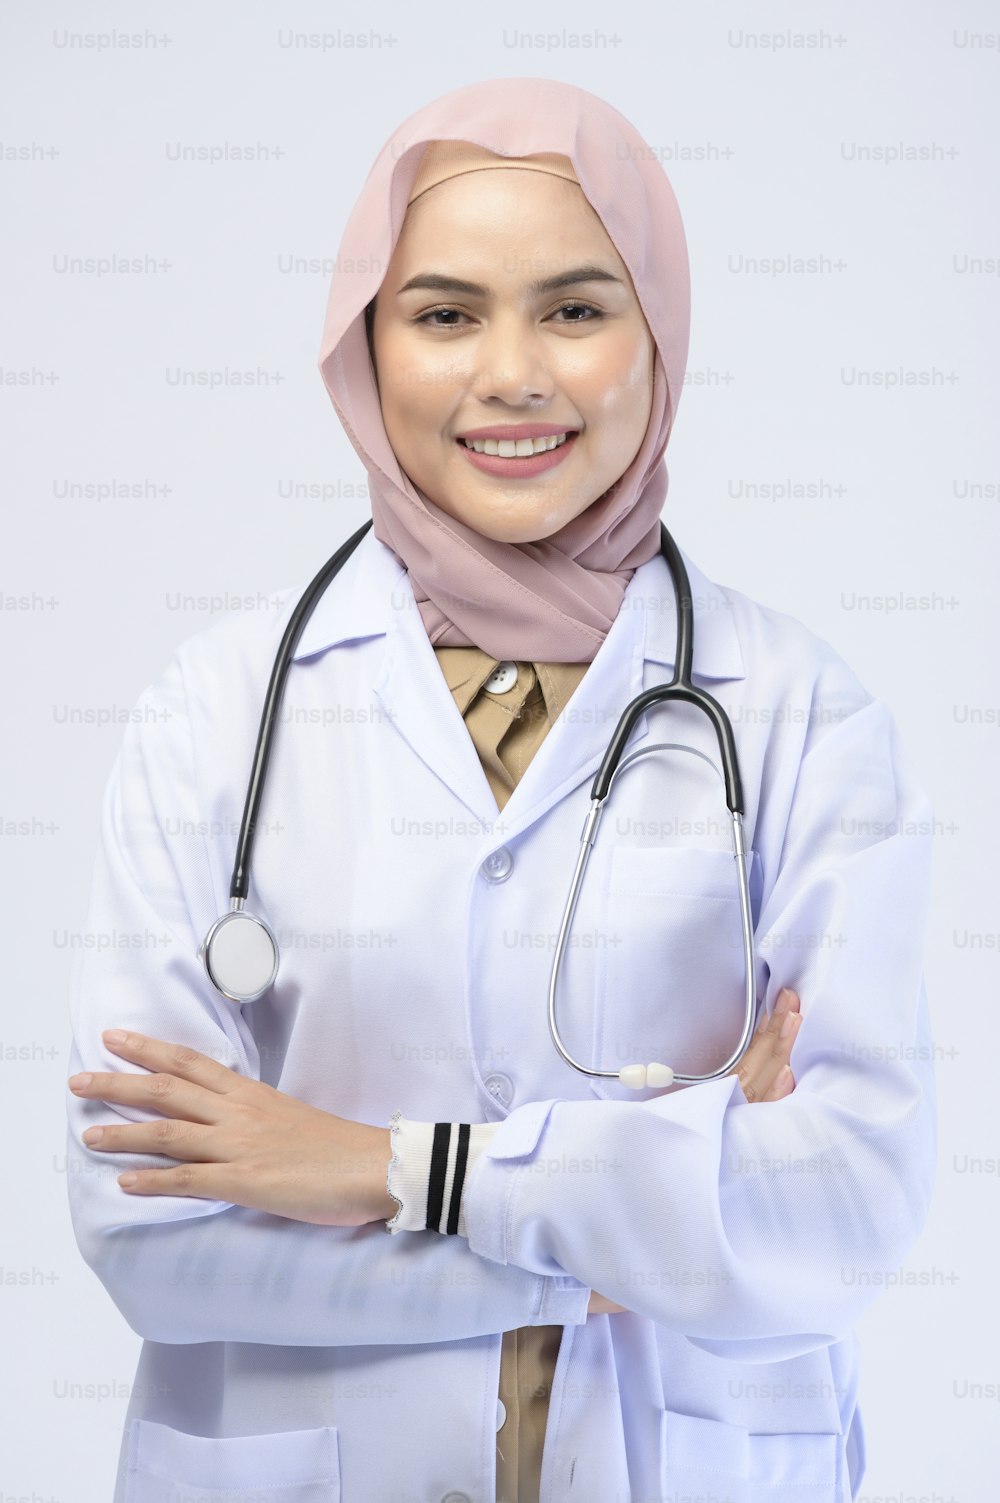 A female muslim doctor with hijab over white background studio.